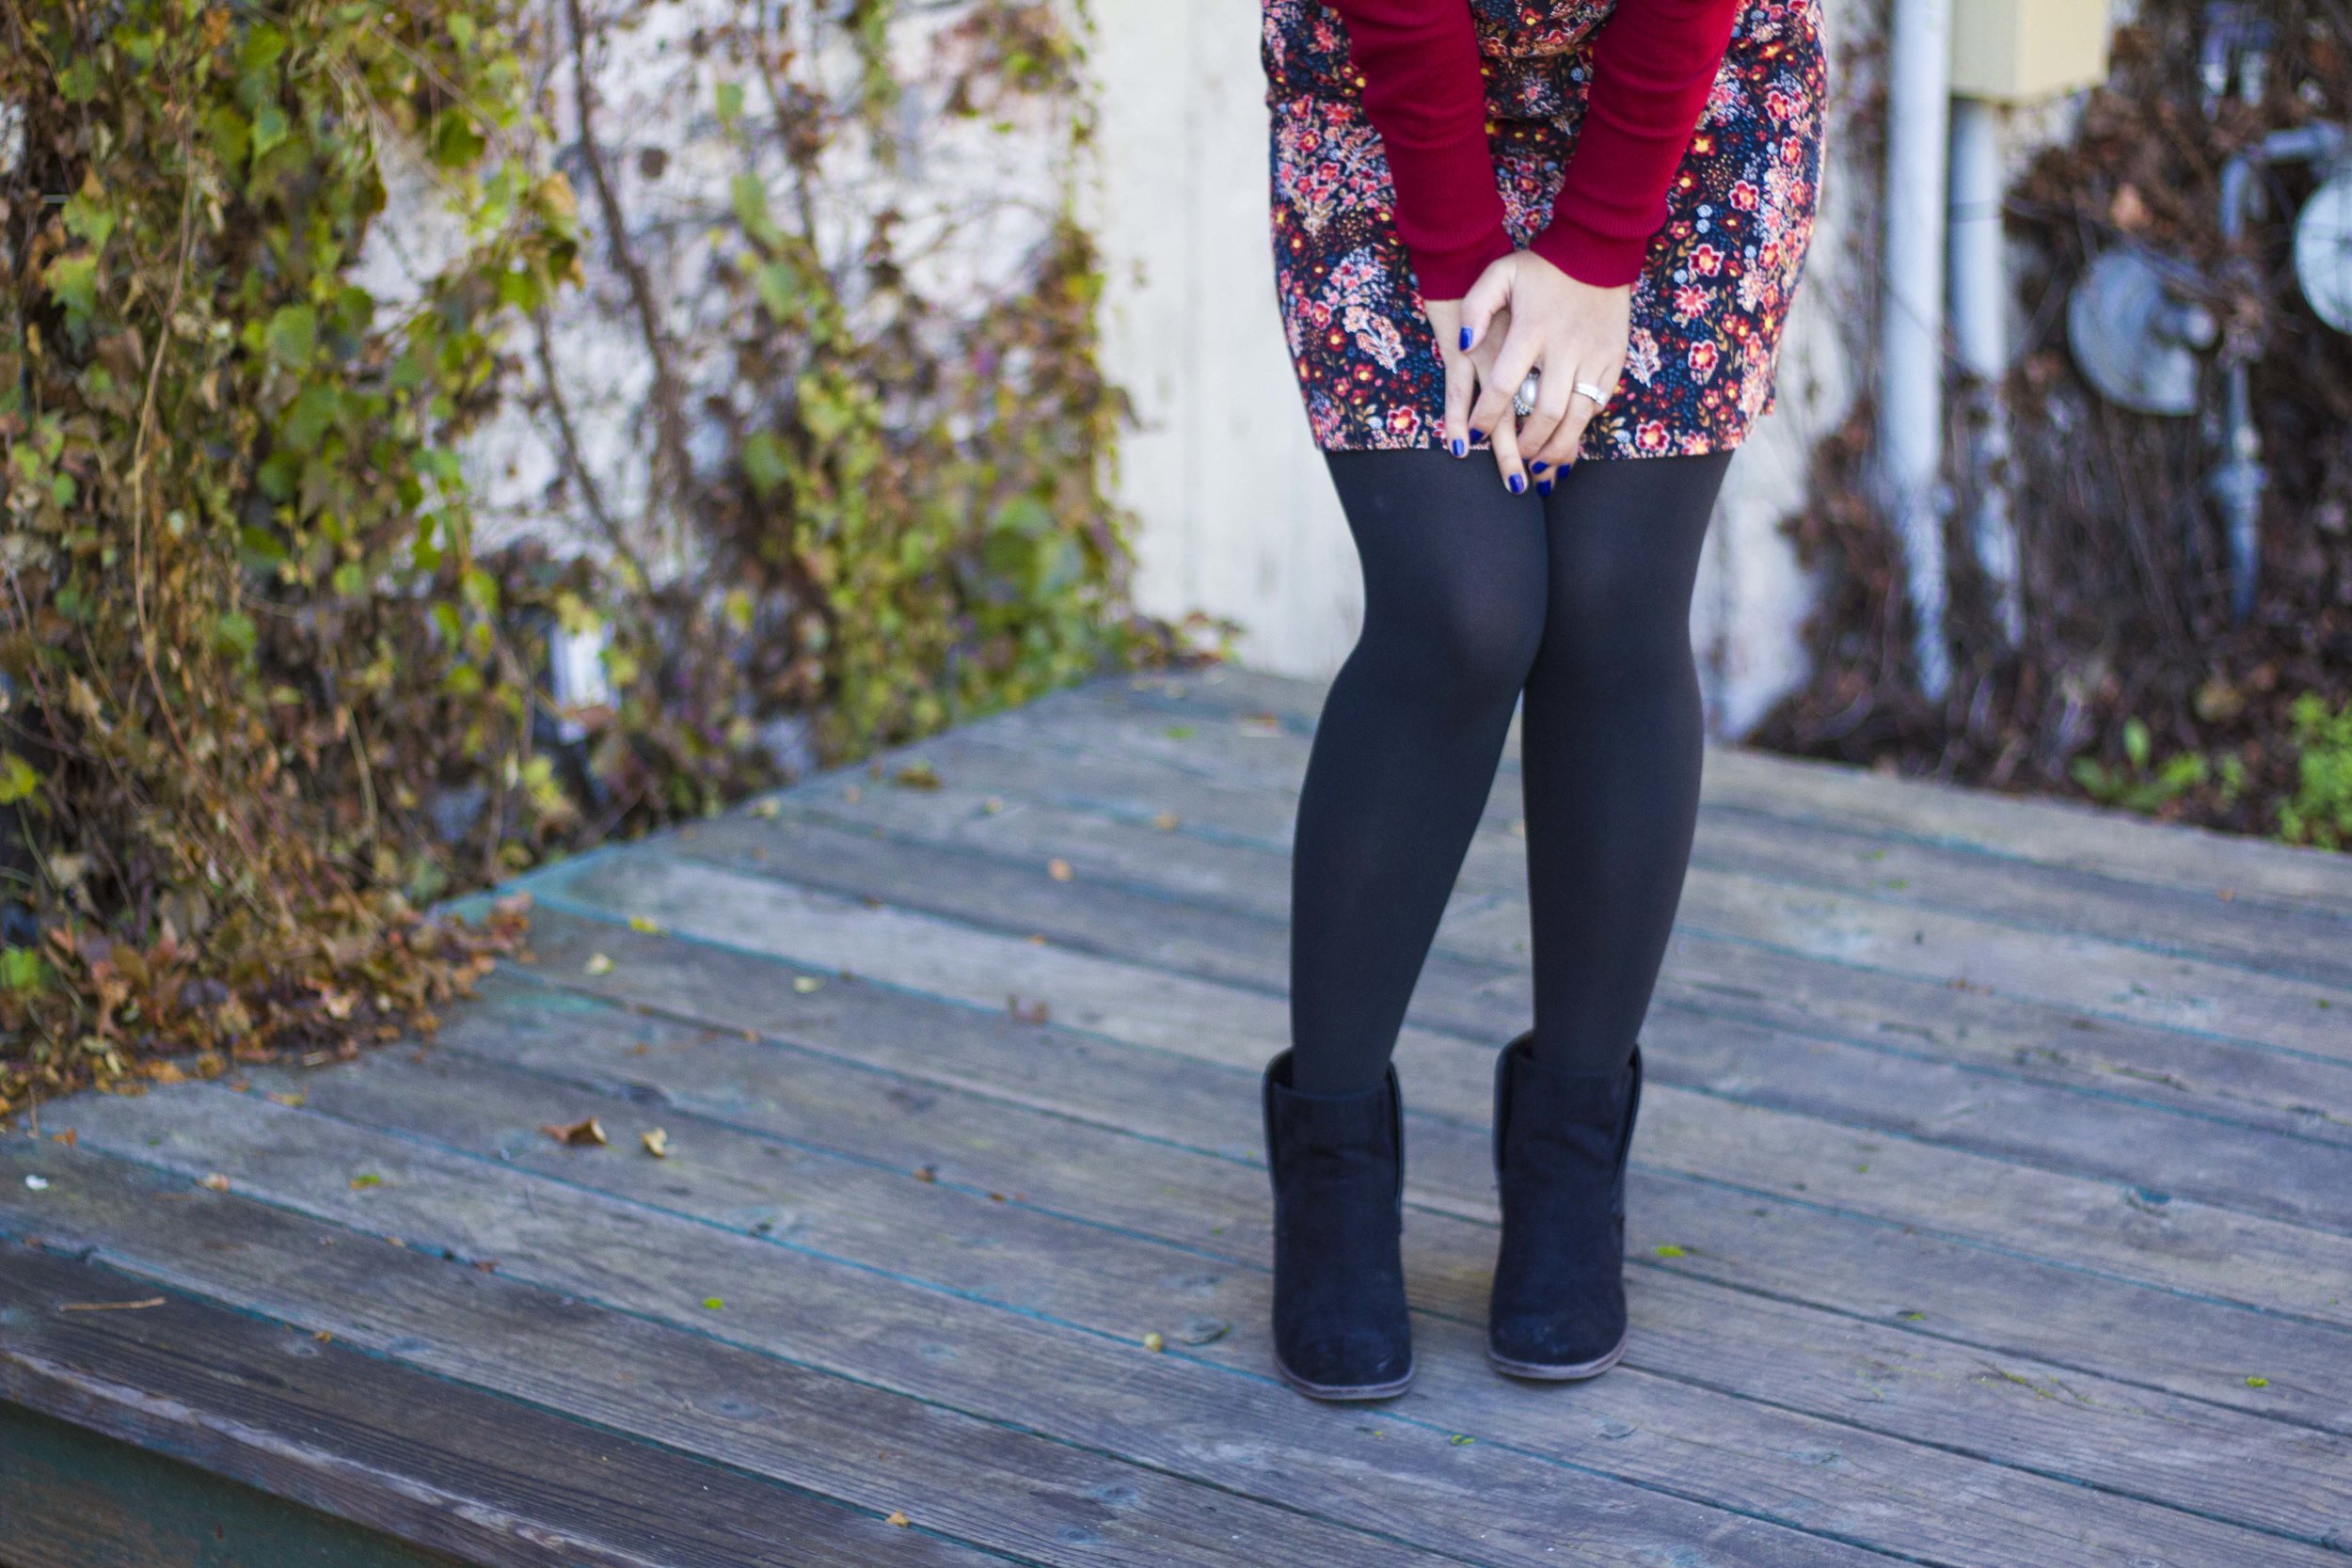  Tights & Boots 